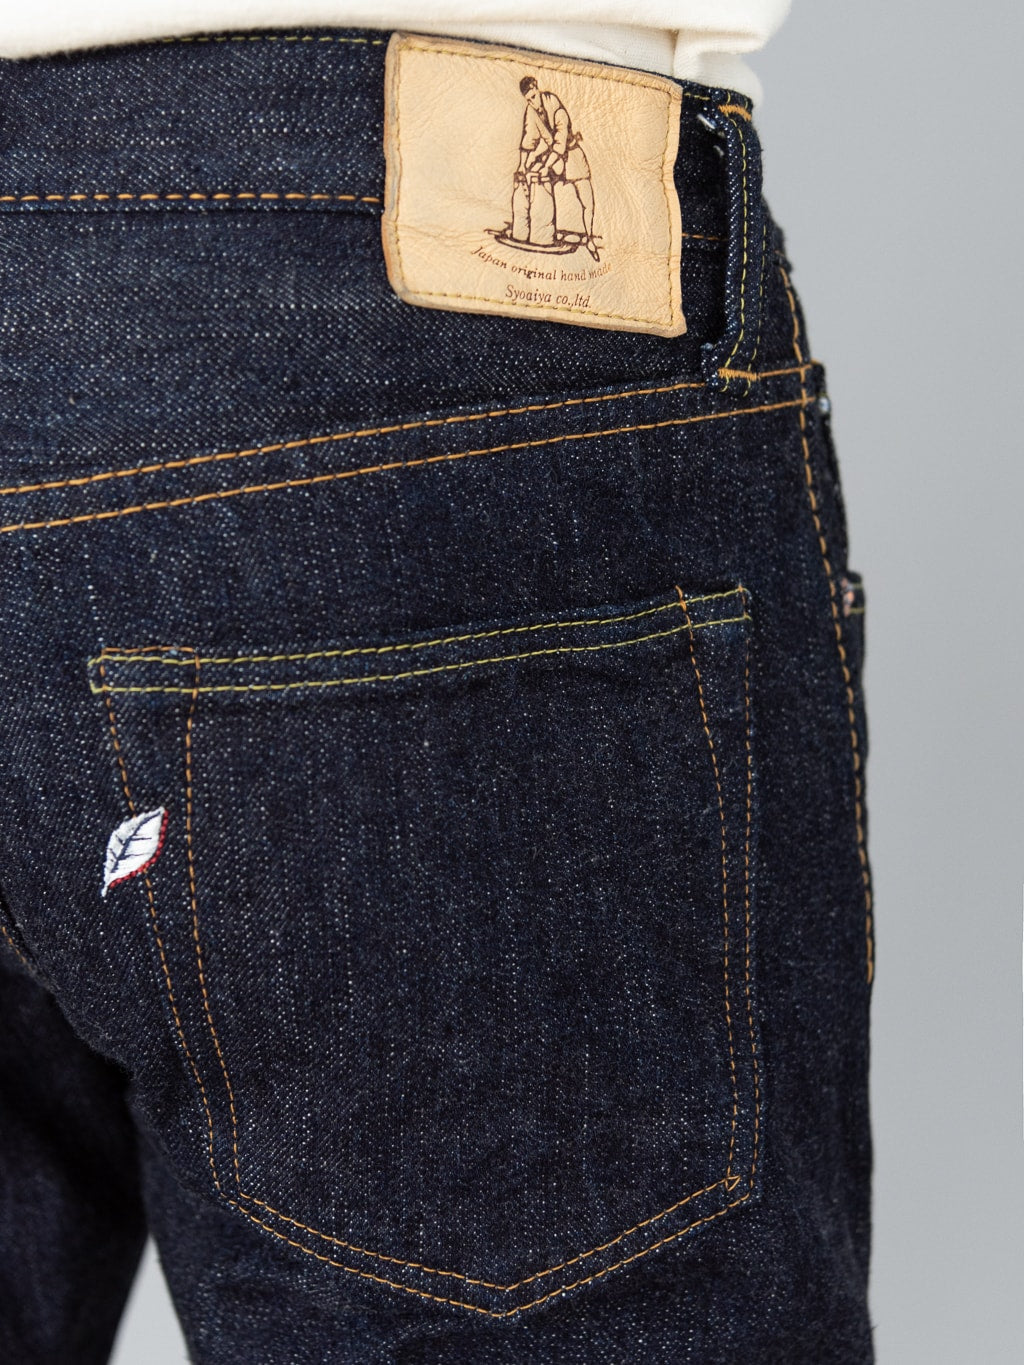 Pure Blue Japan Relaxed Tapered denim jeans back pocket detail